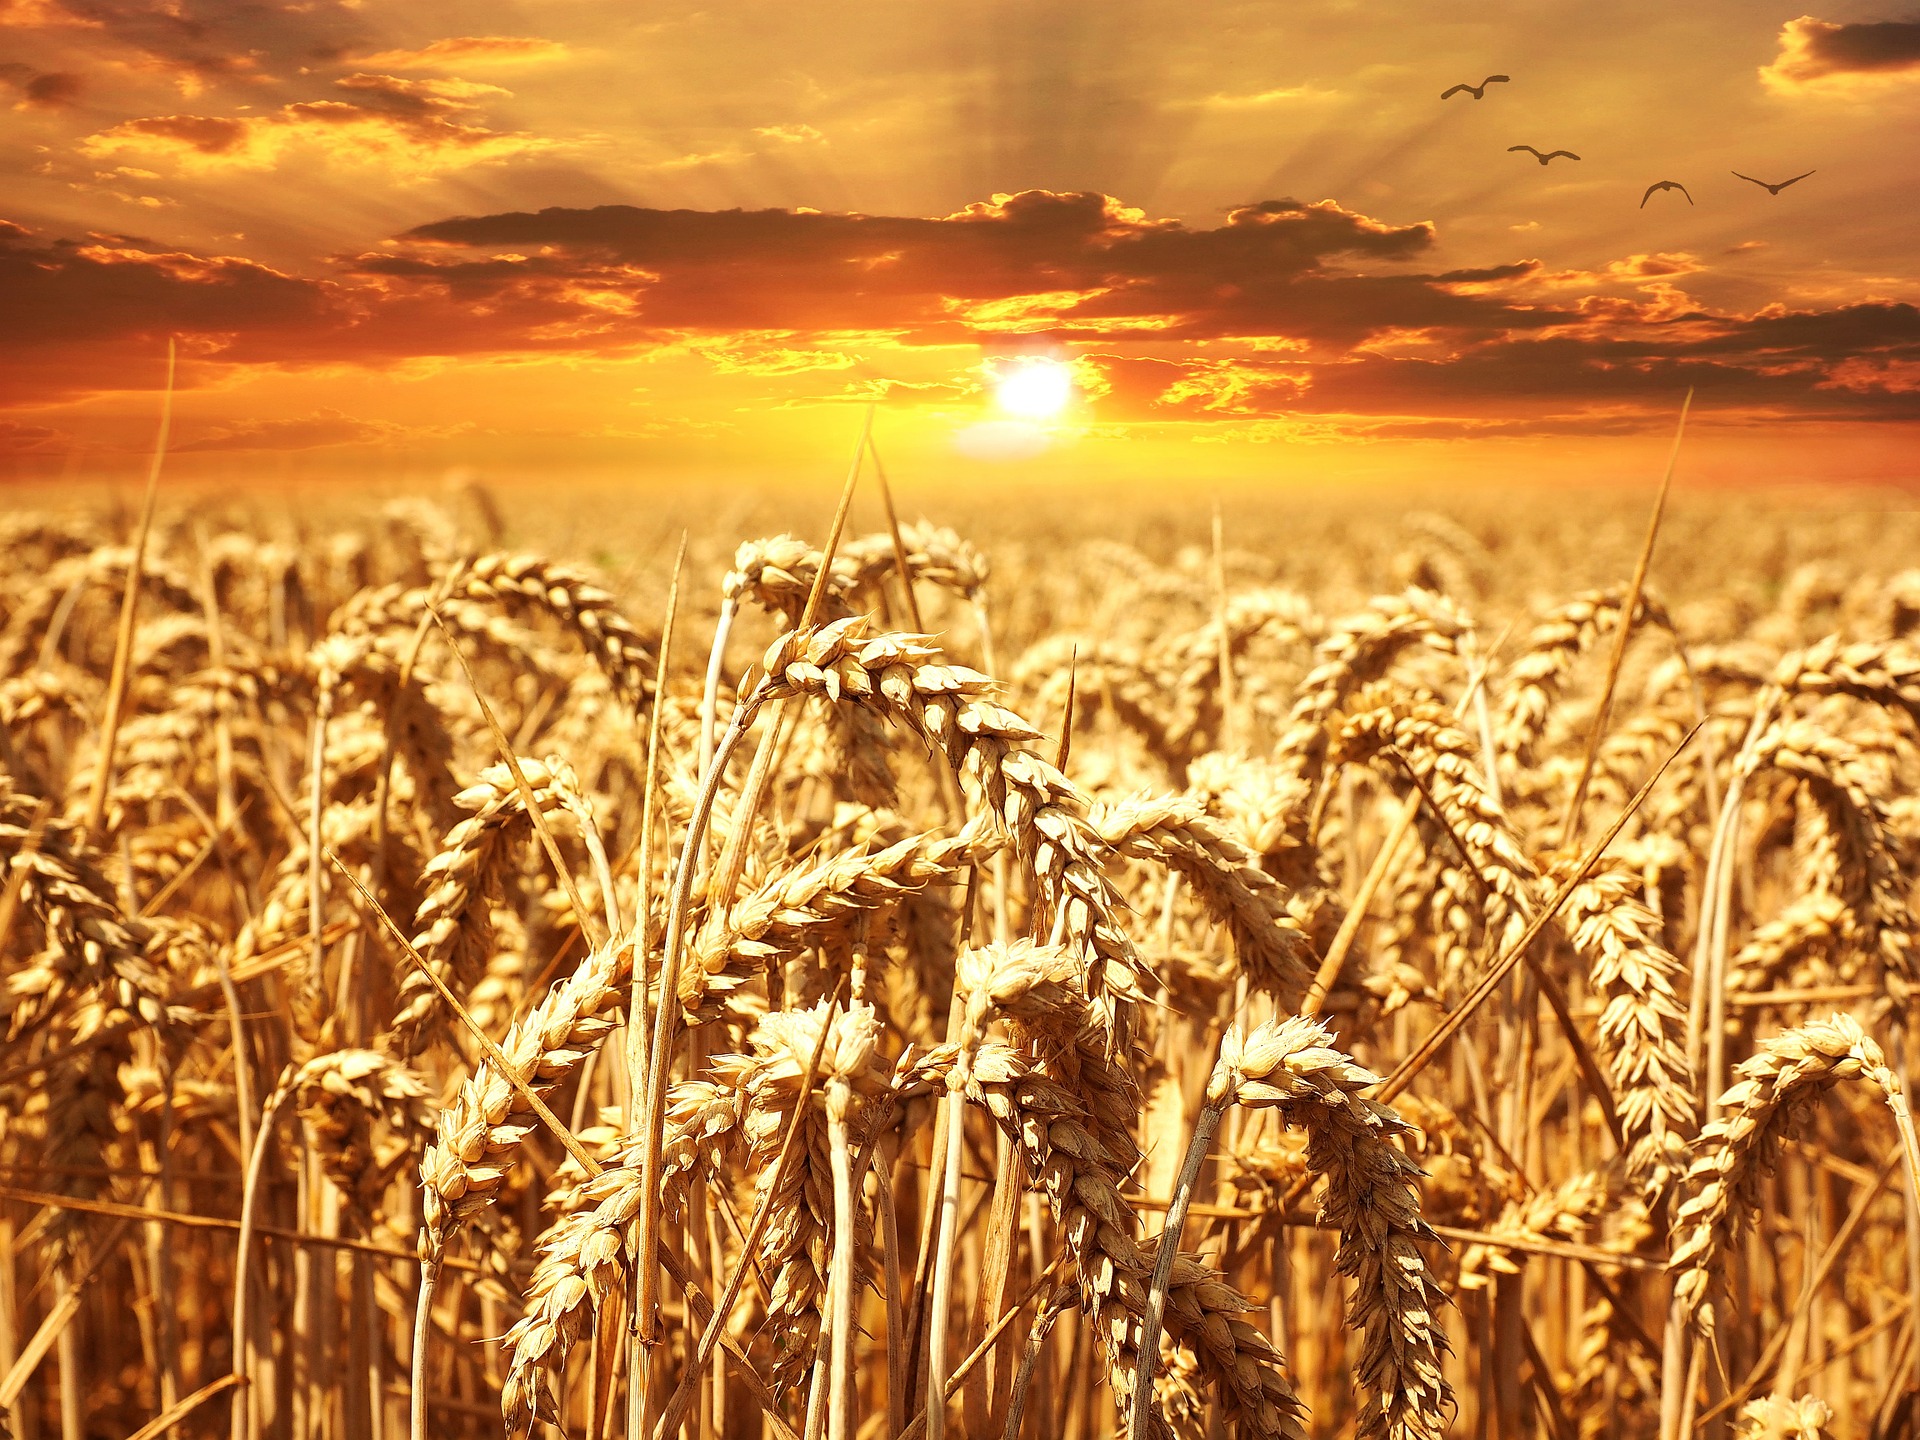 Feeding the world – the future of agricultural commodities